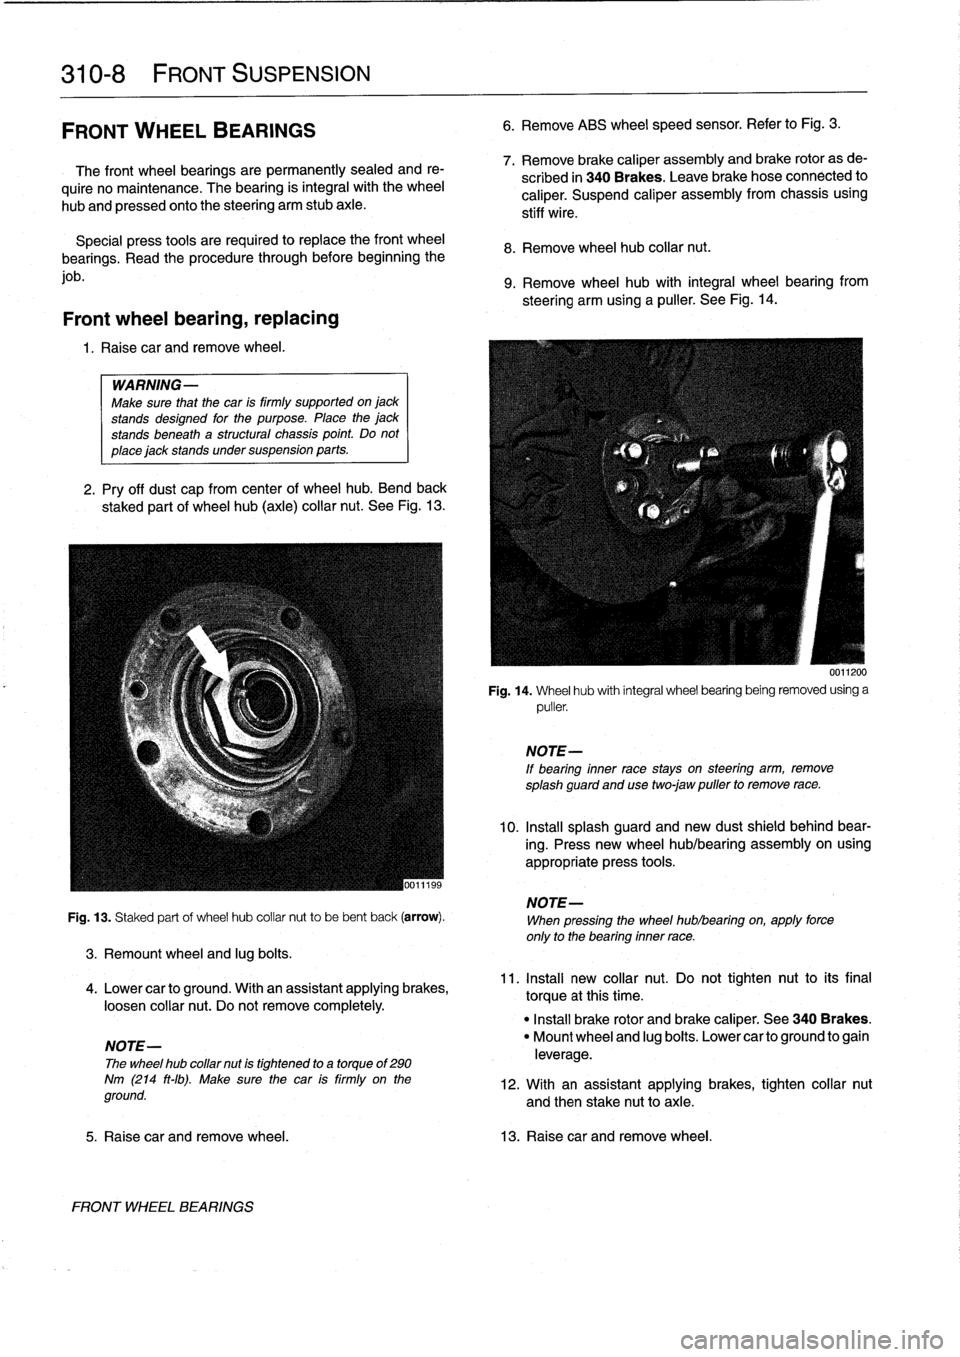 BMW 318i 1994 E36 Workshop Manual 
310-
8

	

FRONT
SUSPENSION

FRONT
WHEEL
BEARINGS

The
front
wheel
bearings
are
permanently
sealed
and
re-

quire
no
maintenance
.
The
bearing
is
integral
with
the
wheel

hub
and
pressed
onto
the
ste